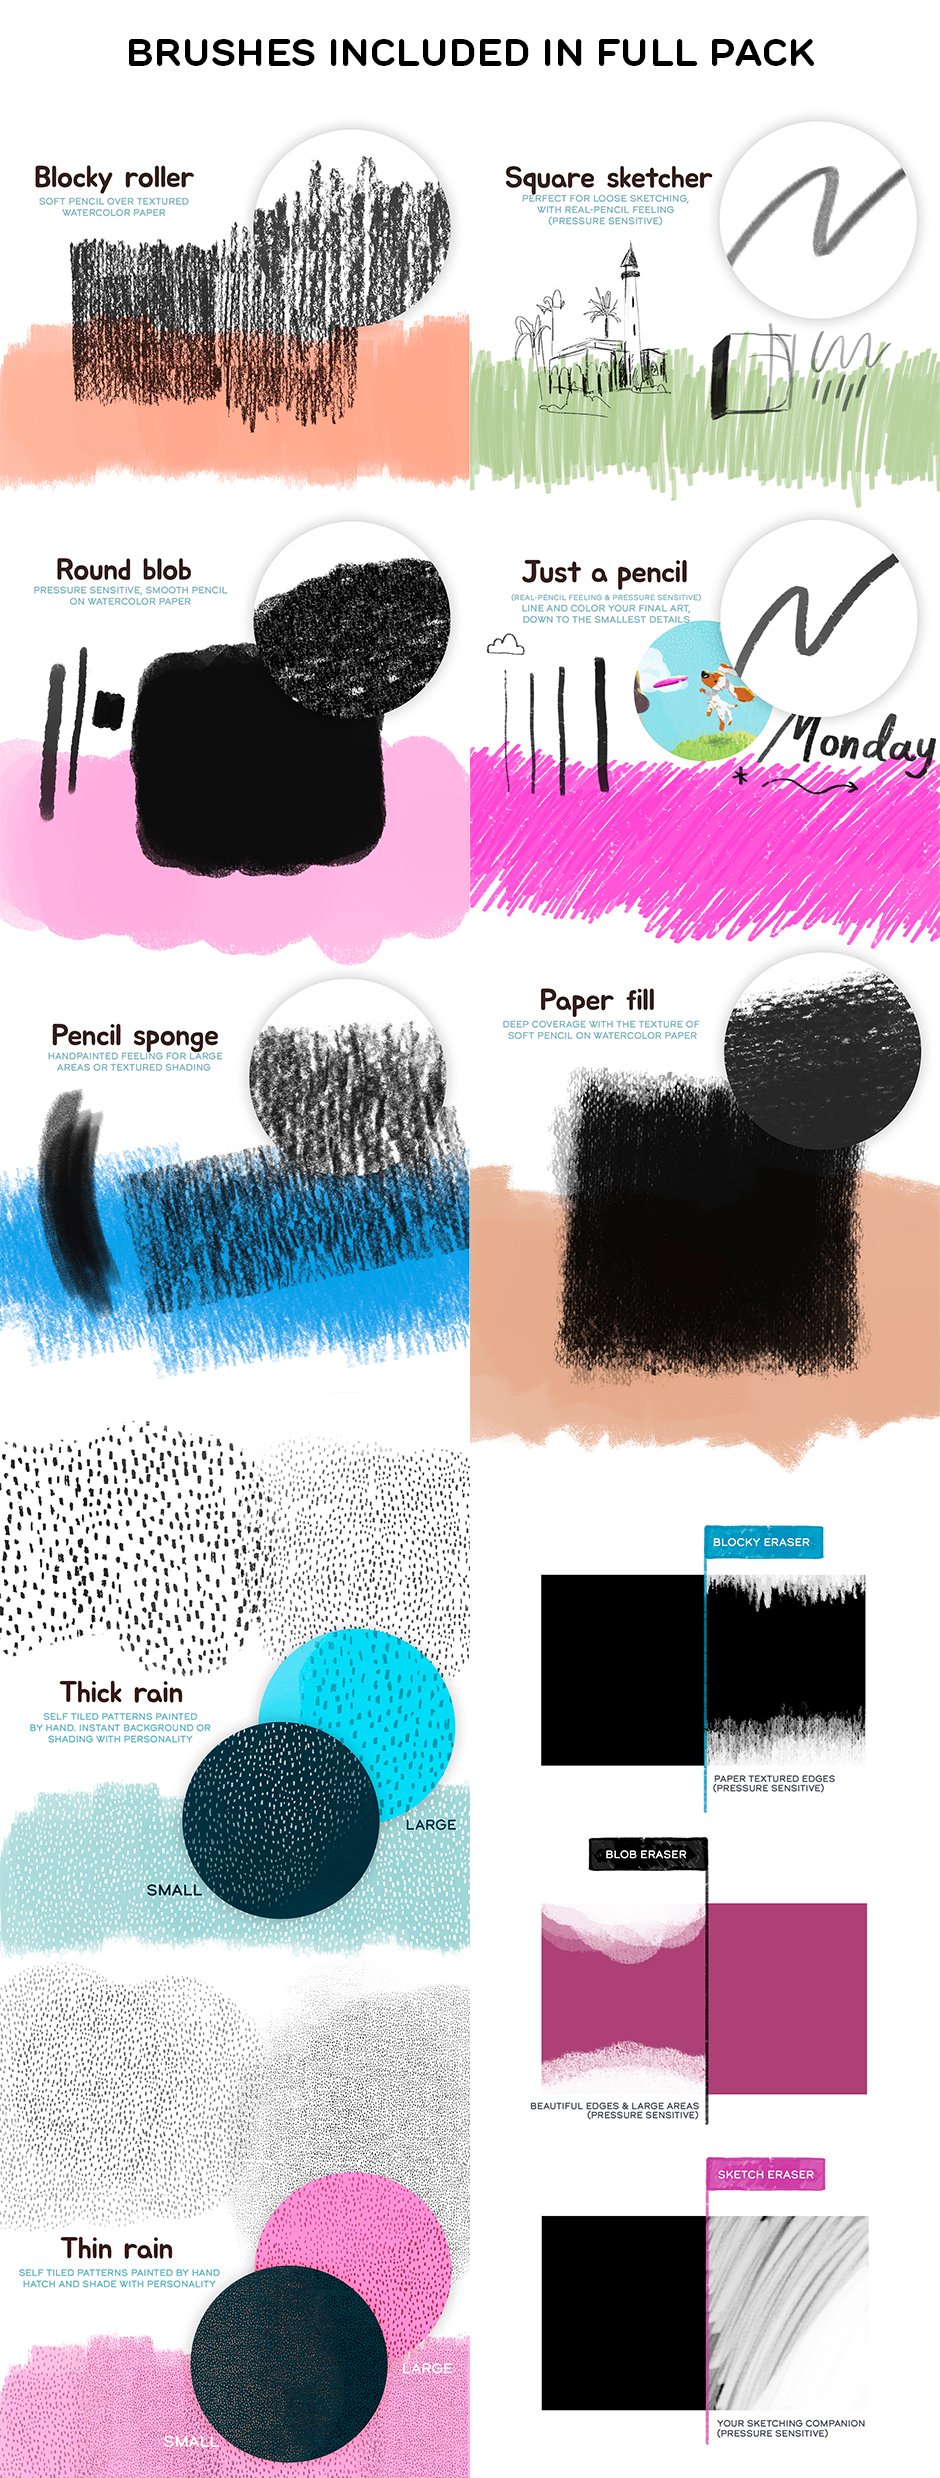 HOMwork Freebie: Laura's Real Pencil And Paper Photoshop Brushes